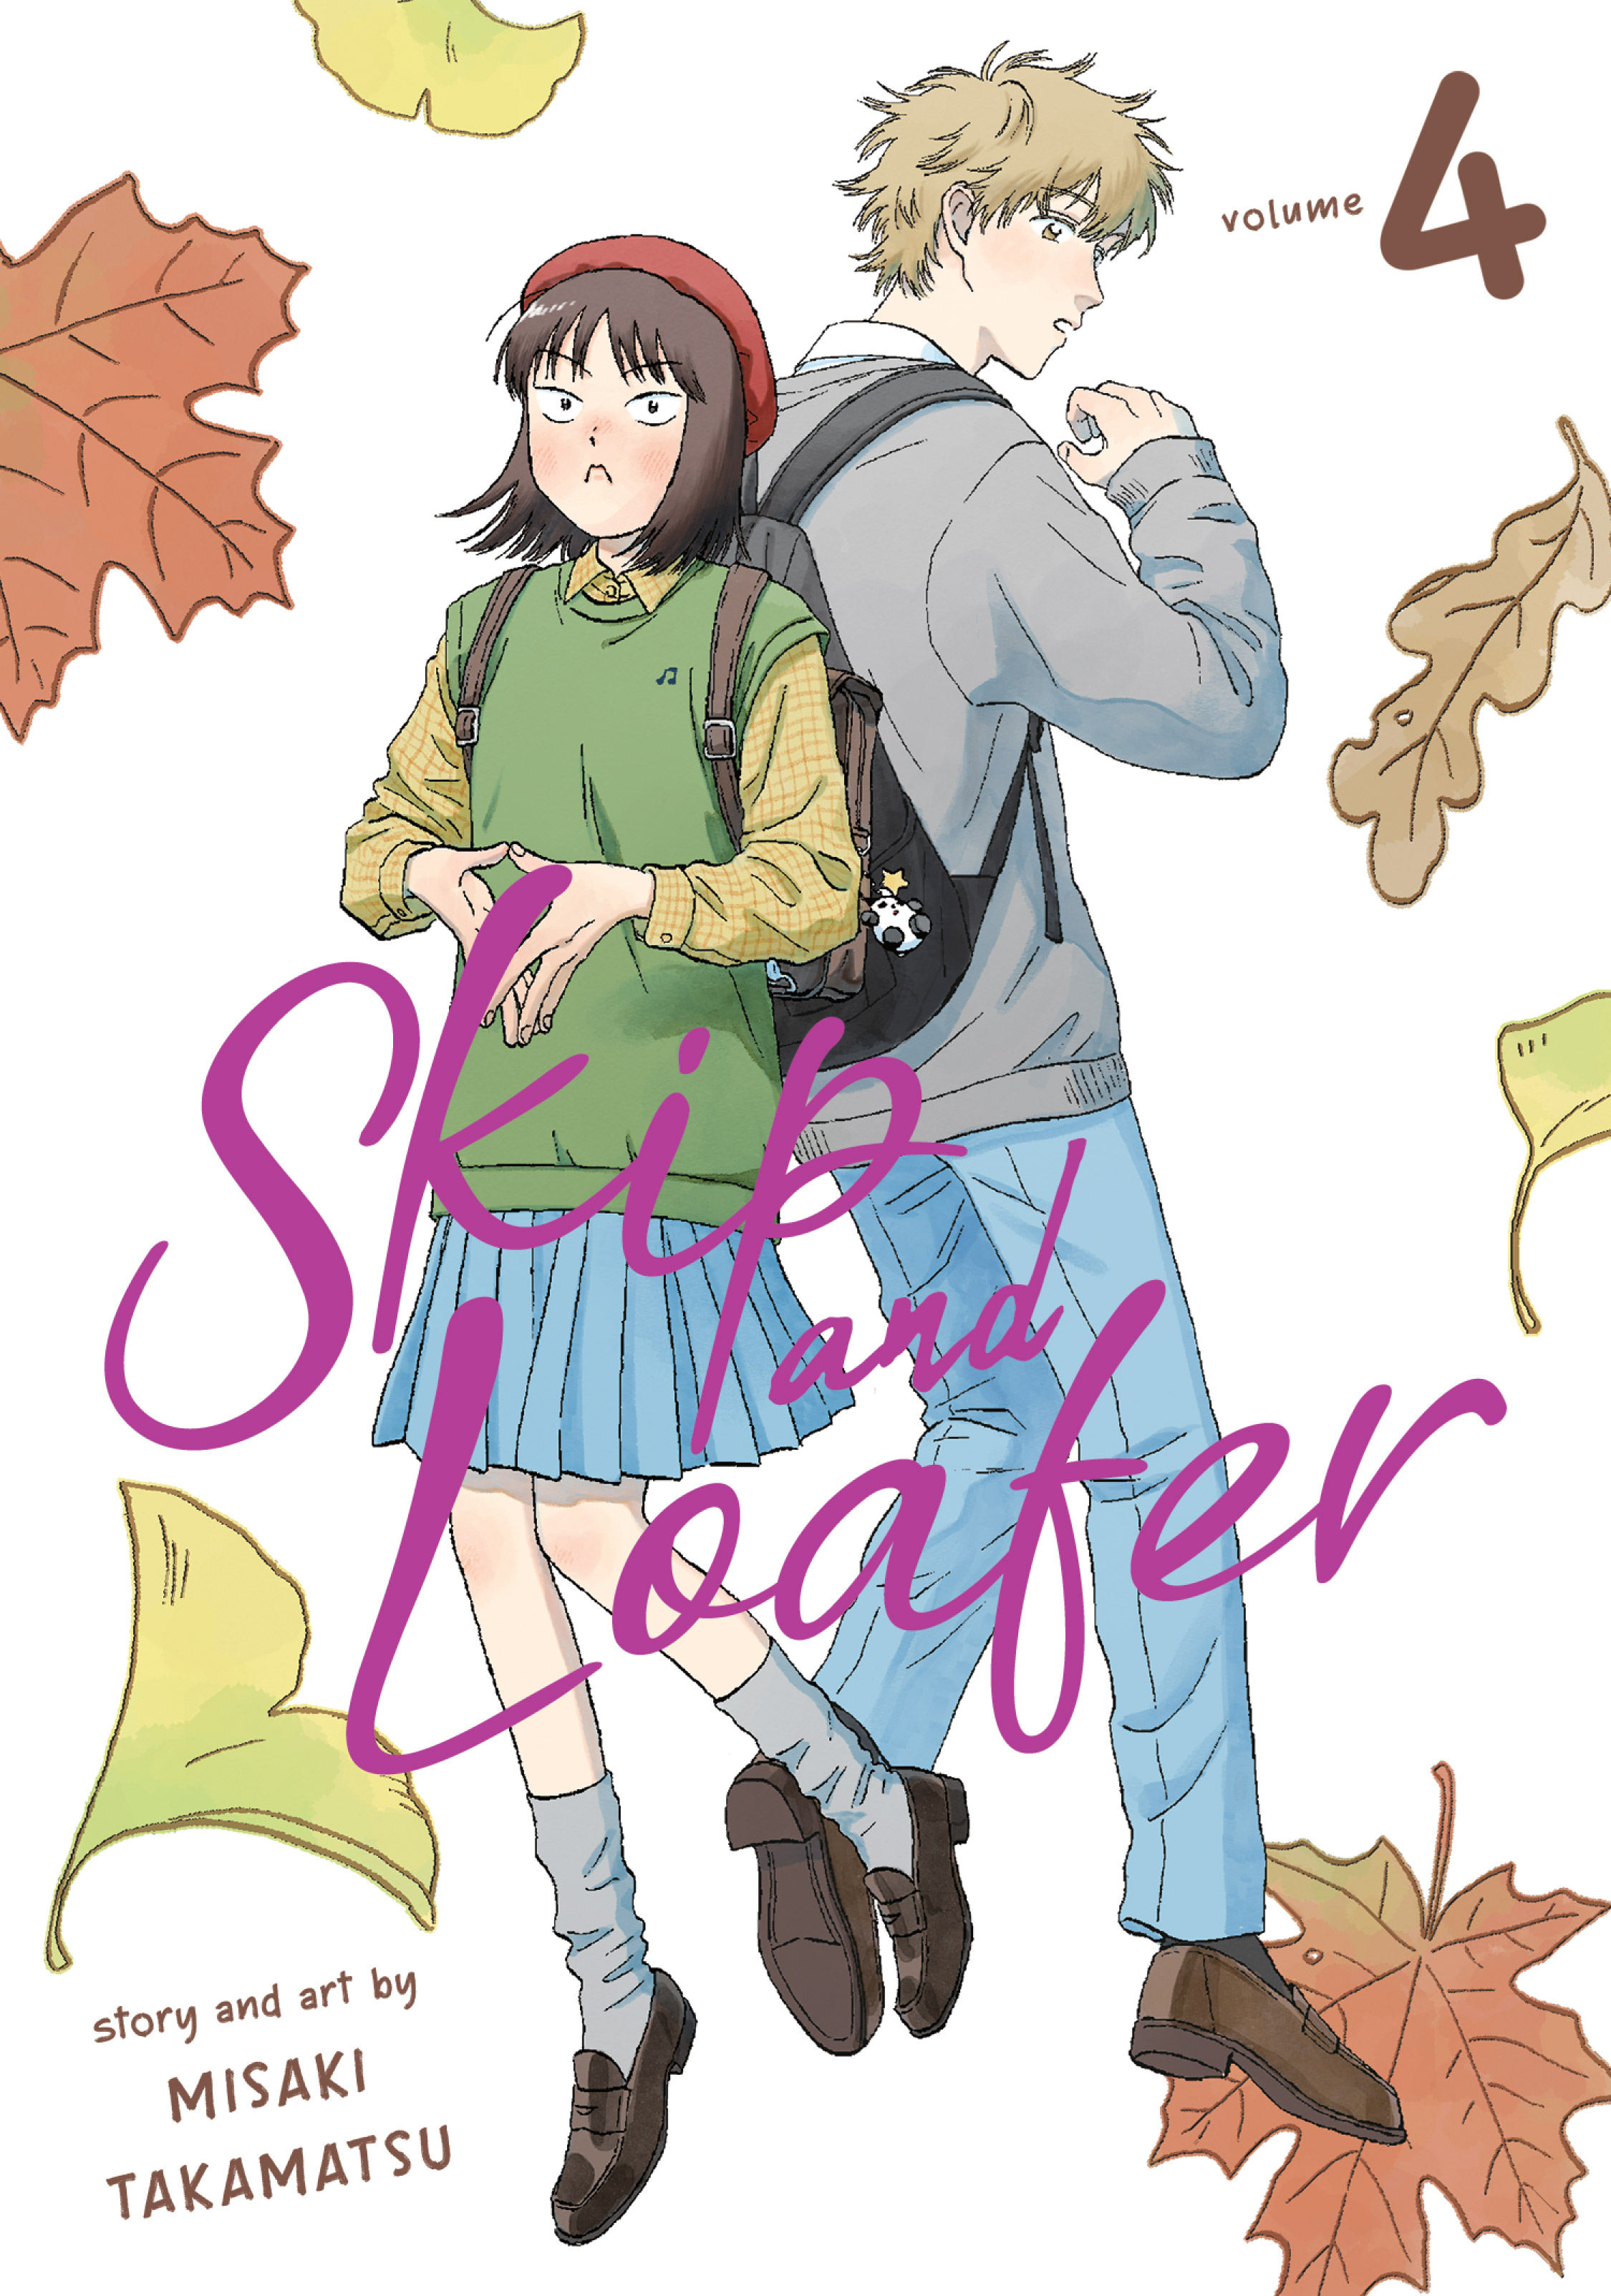 Skip and Loafer Episode 12 Release Date & Time